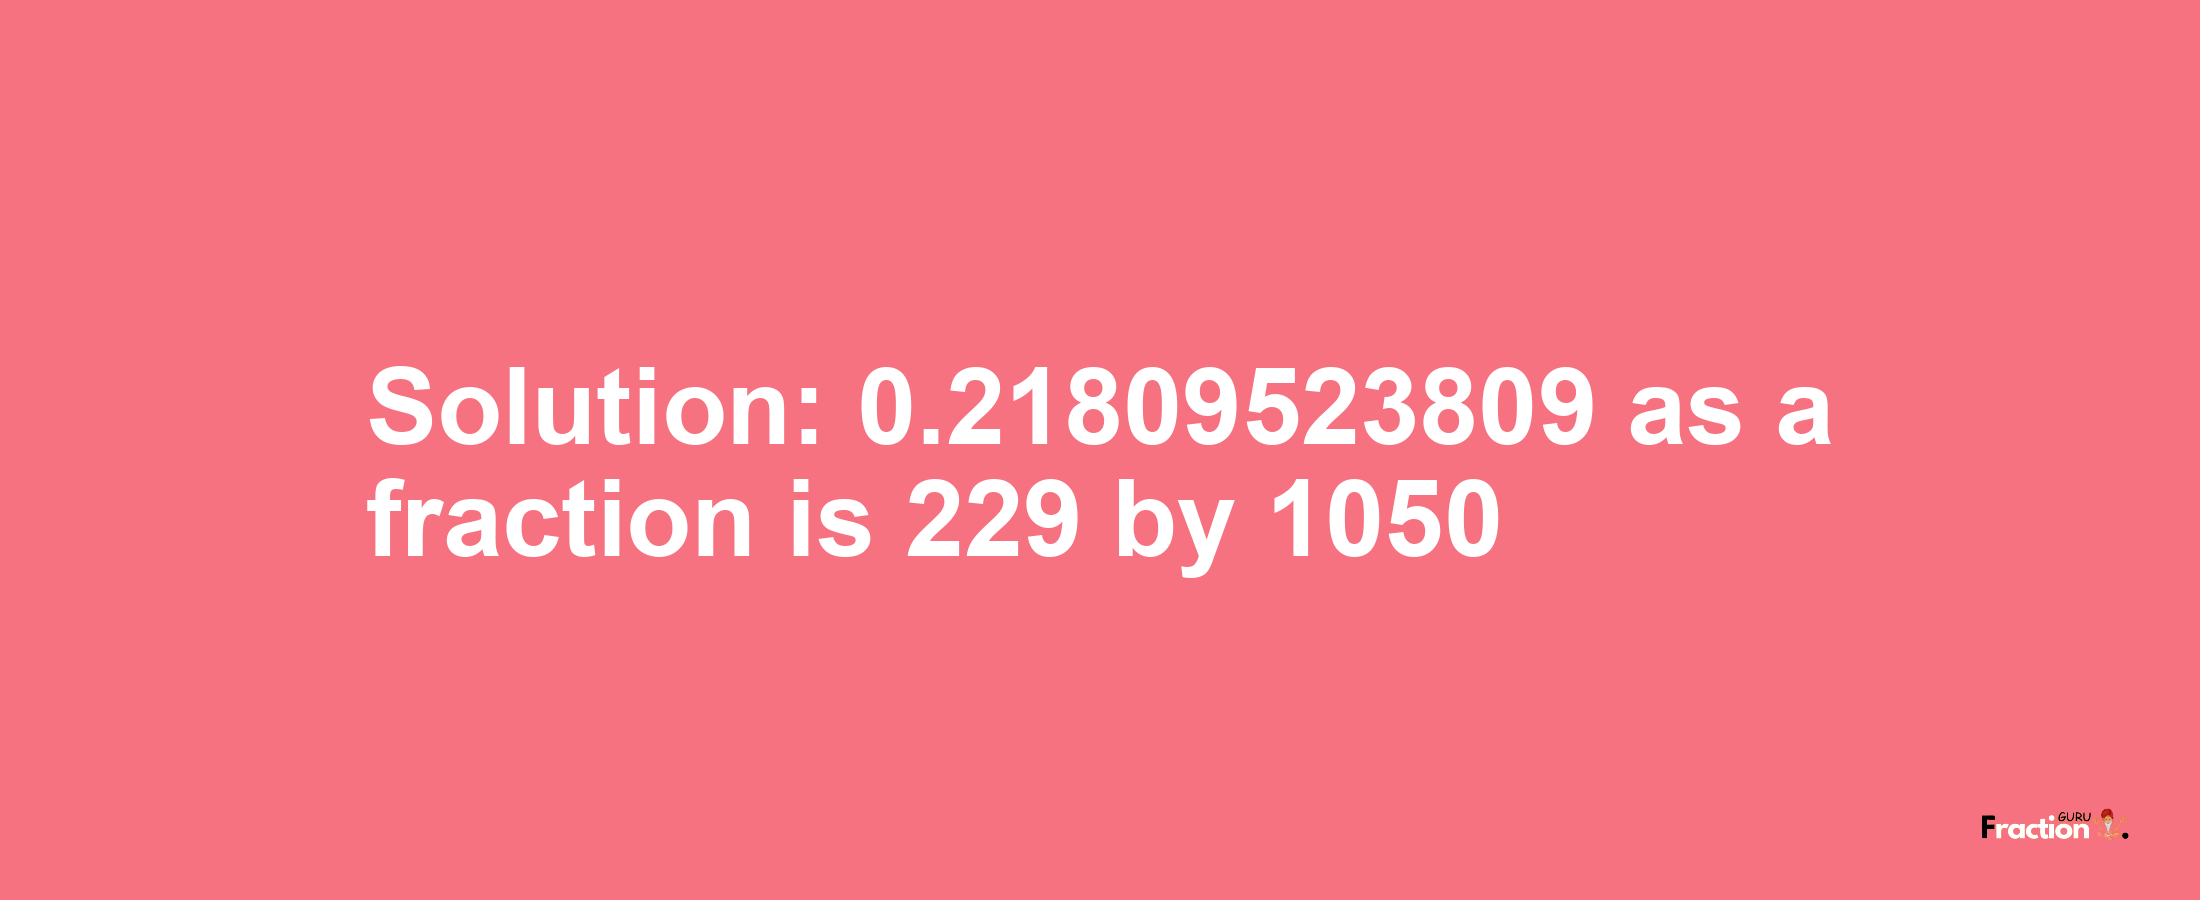 Solution:0.21809523809 as a fraction is 229/1050